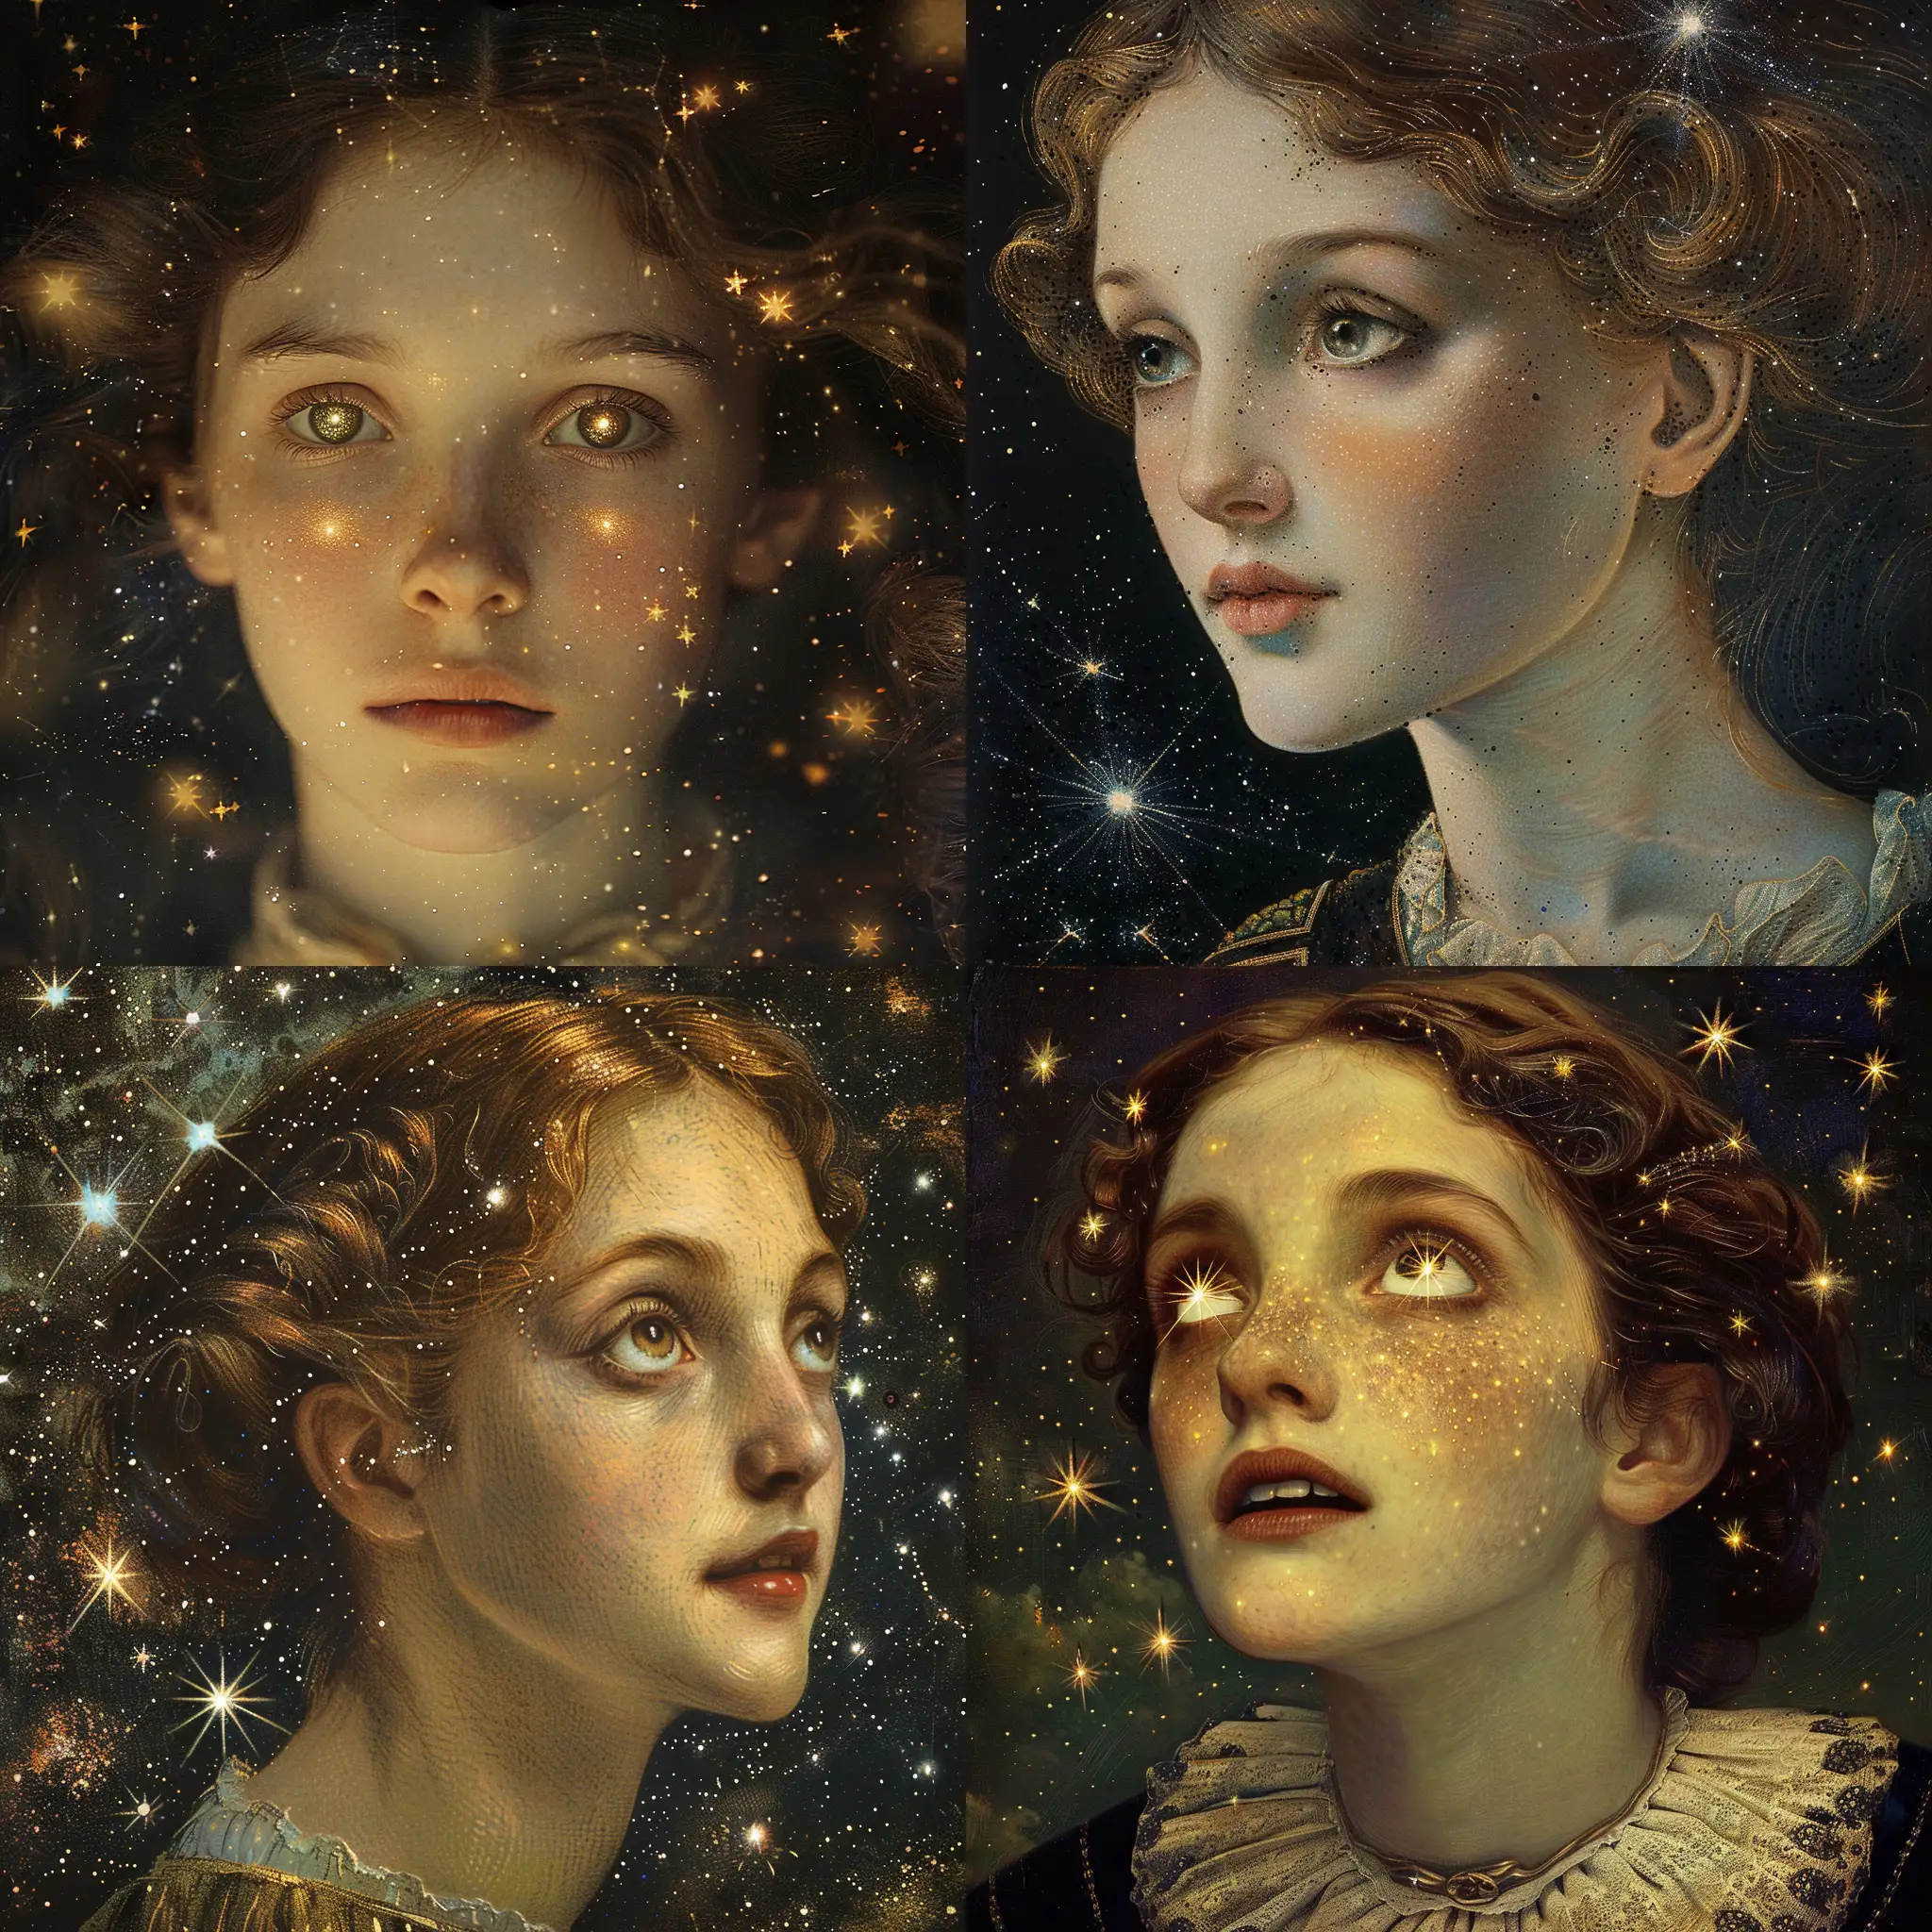 Ethereal-Victorian-Woman-in-Space-with-Starlit-Eyes